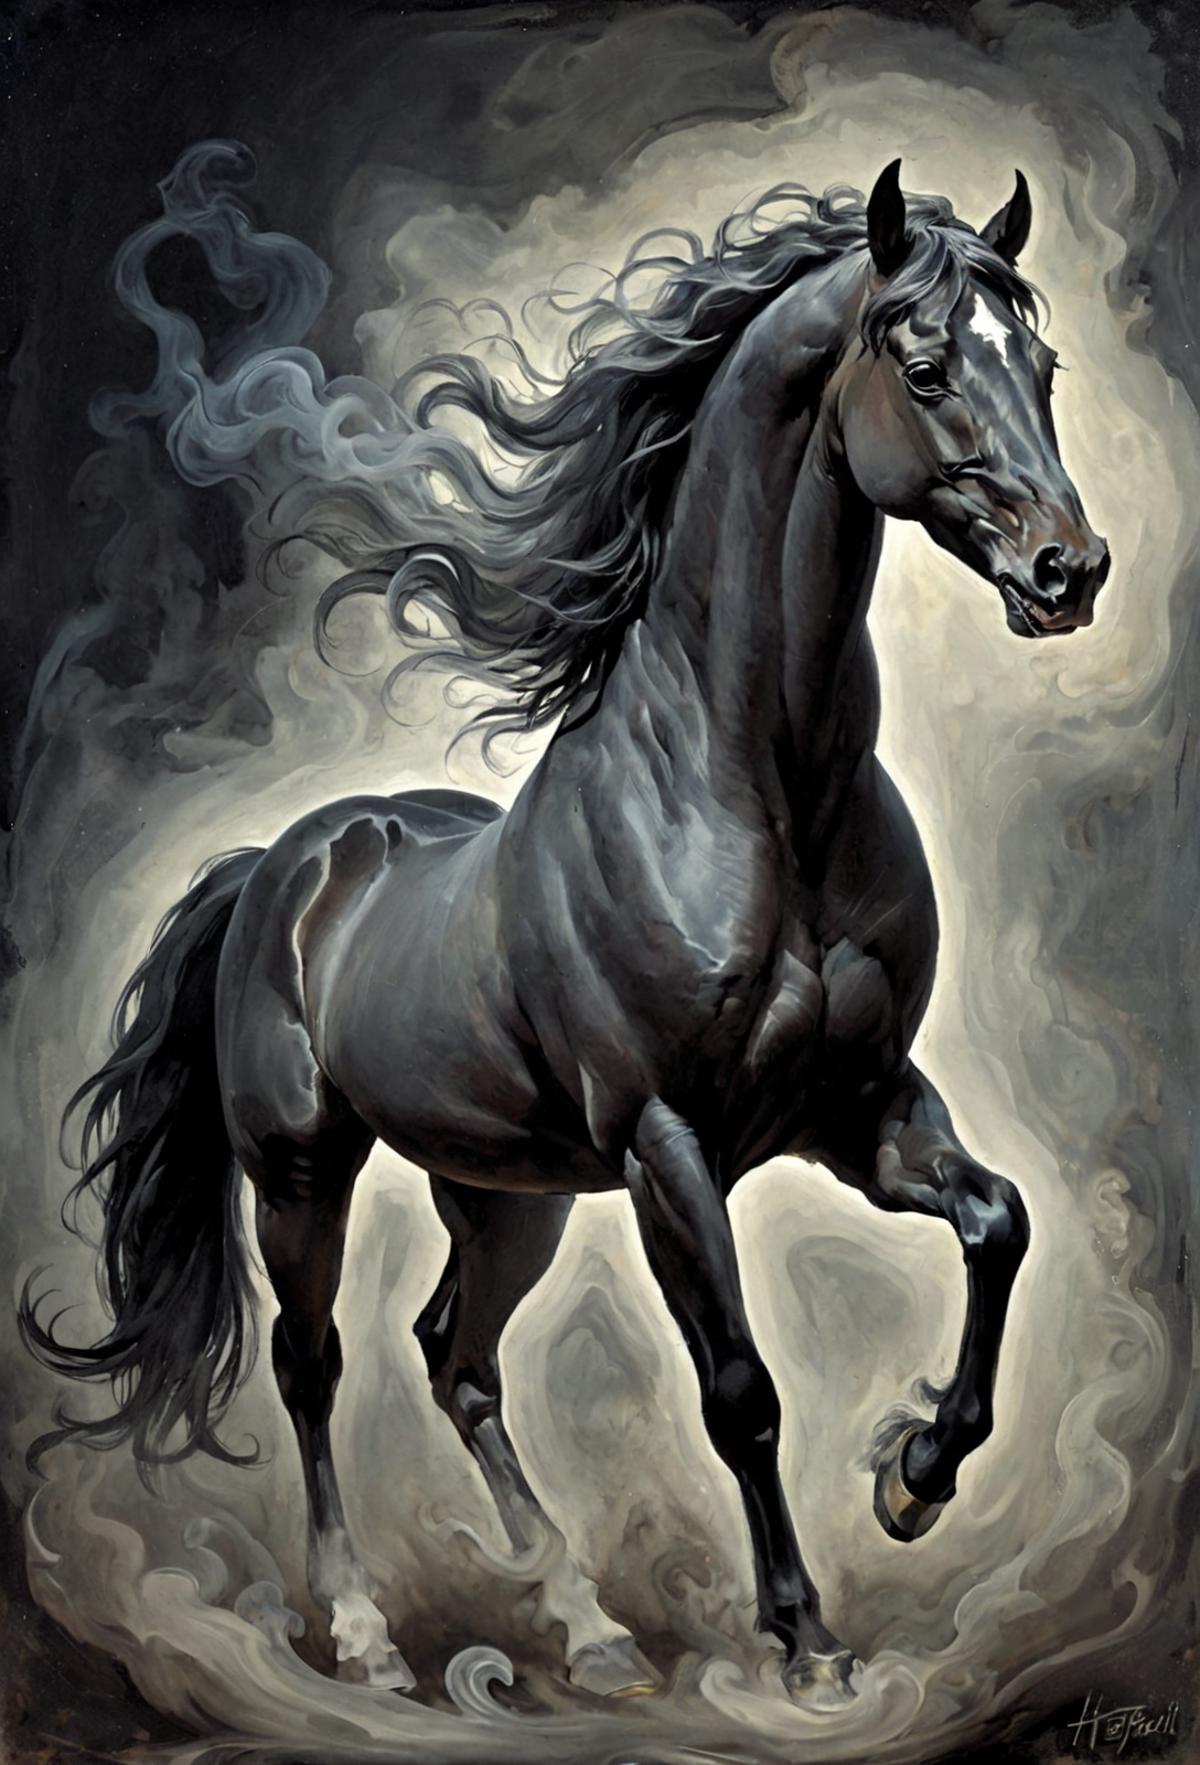 A majestic black horse with long hair, painted in a dark environment.